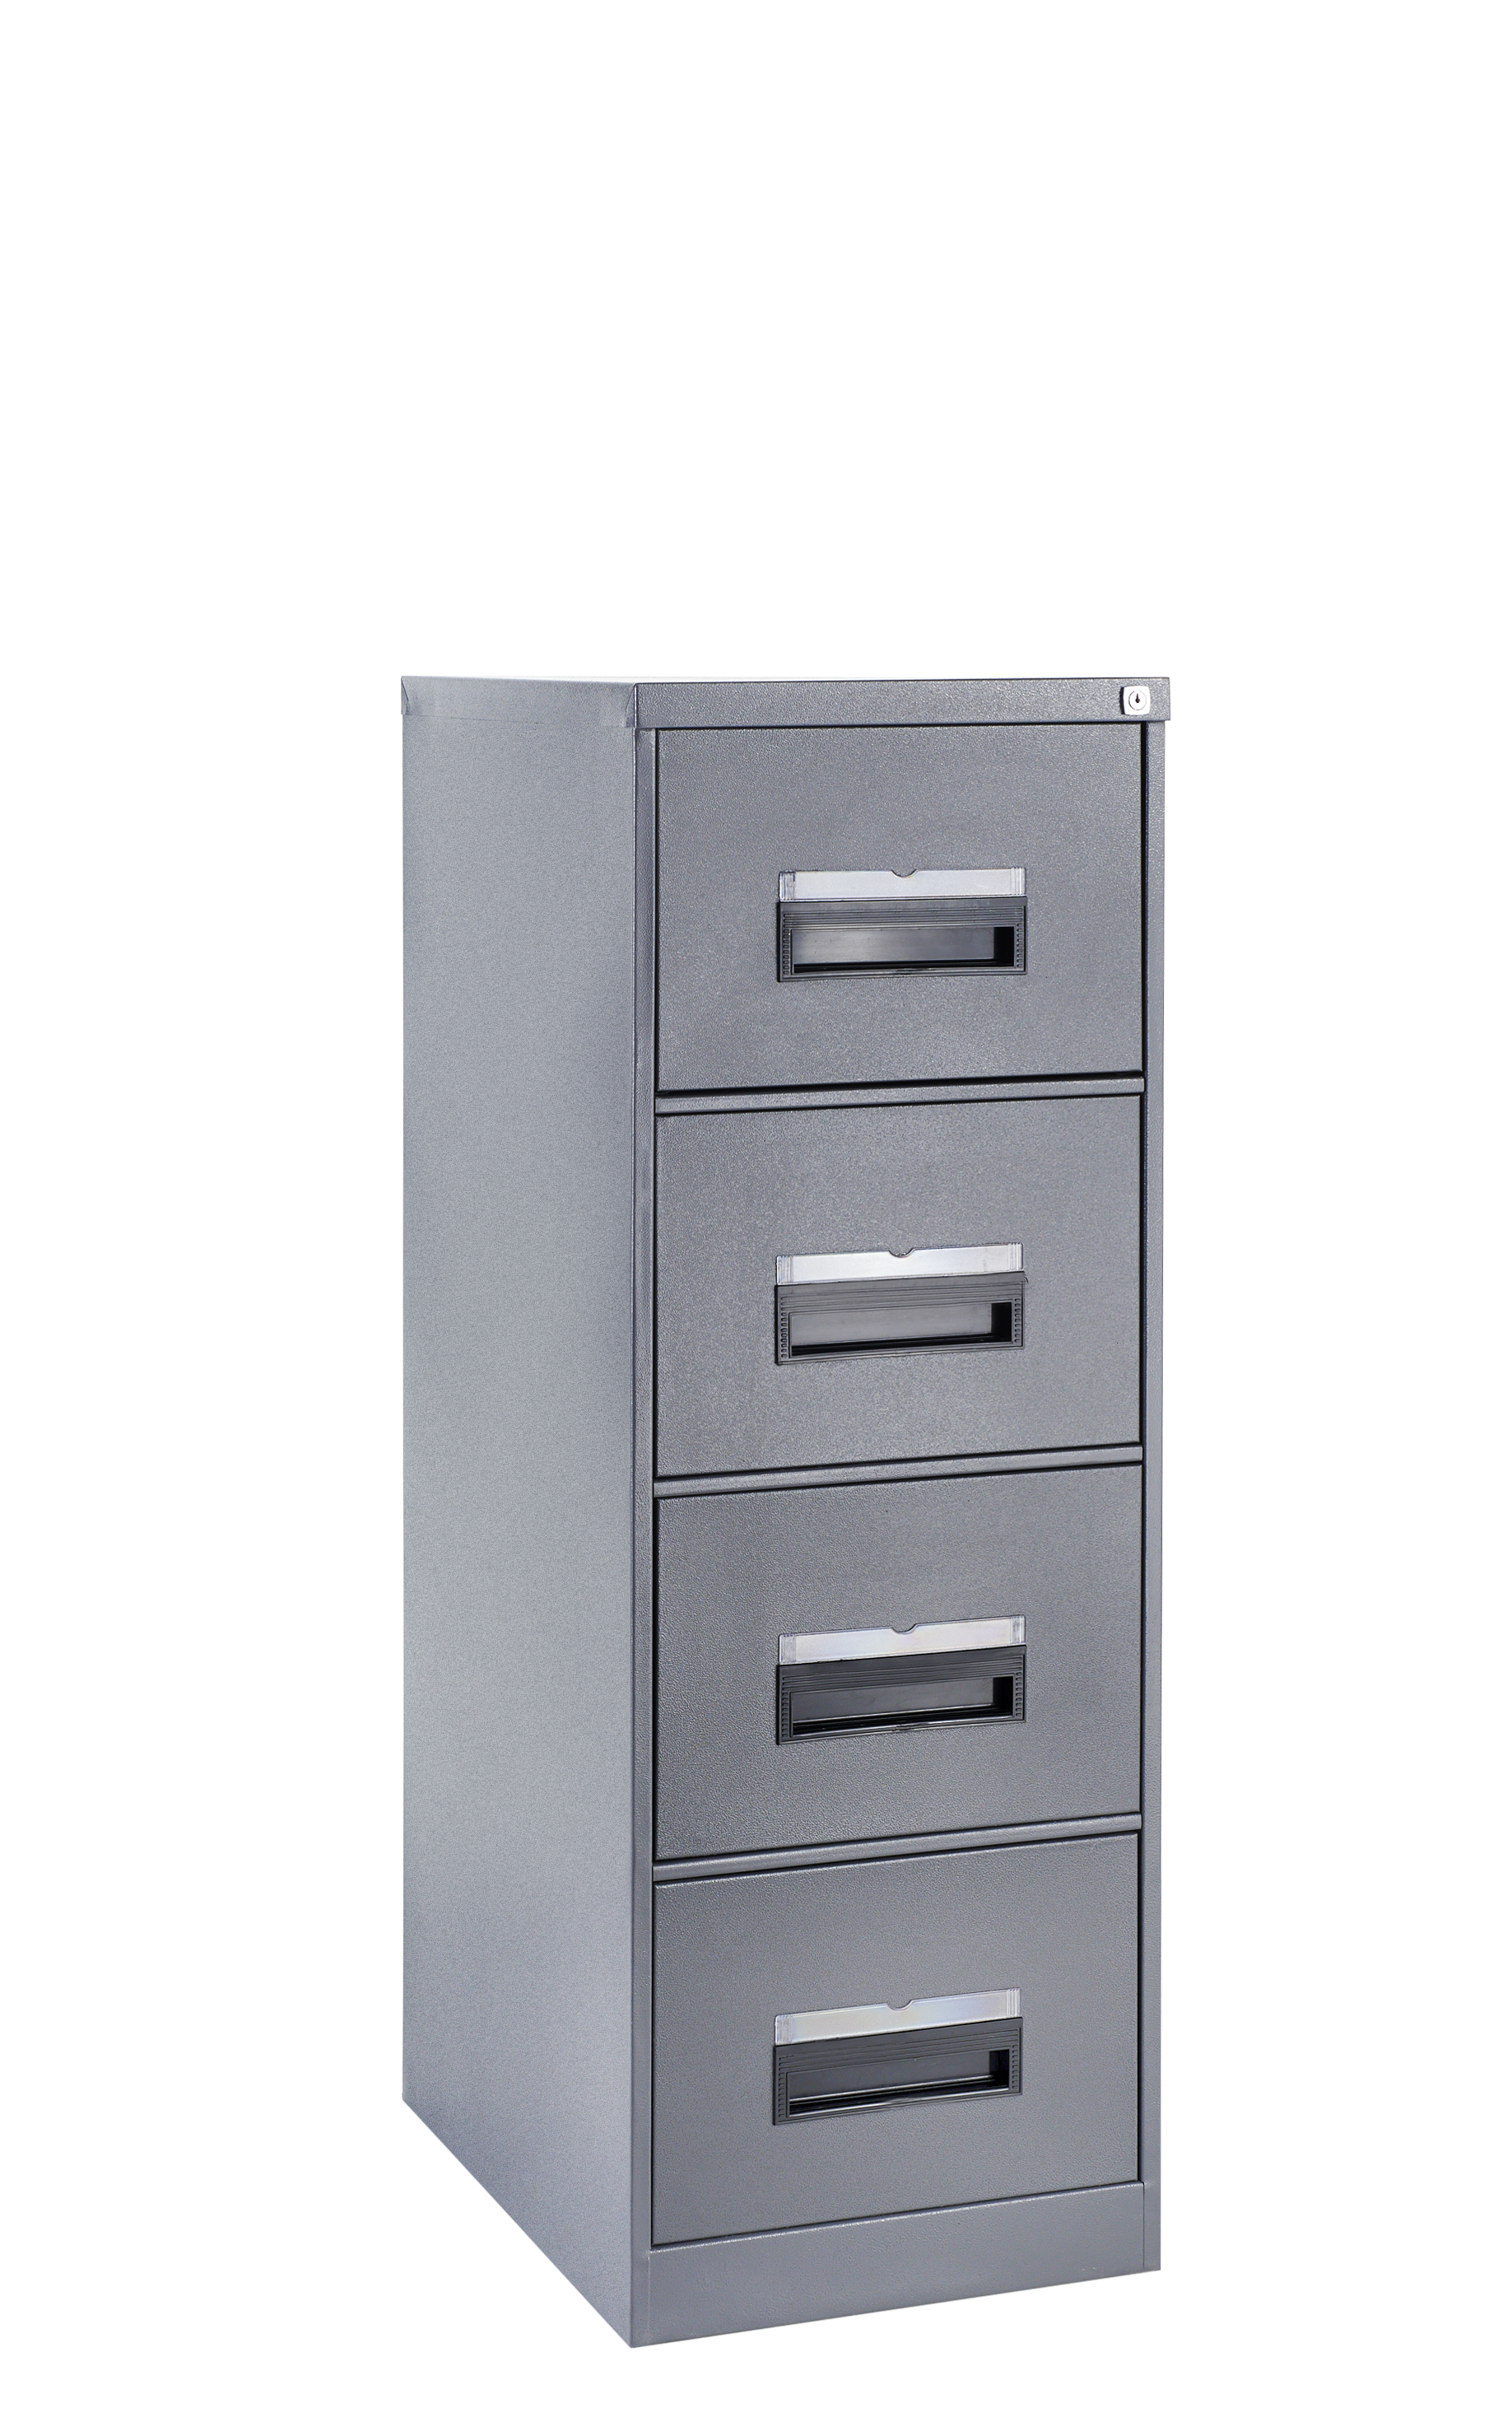 Steel Cabinets With 4 Drawers At Discounted Prices Shop Now And Save